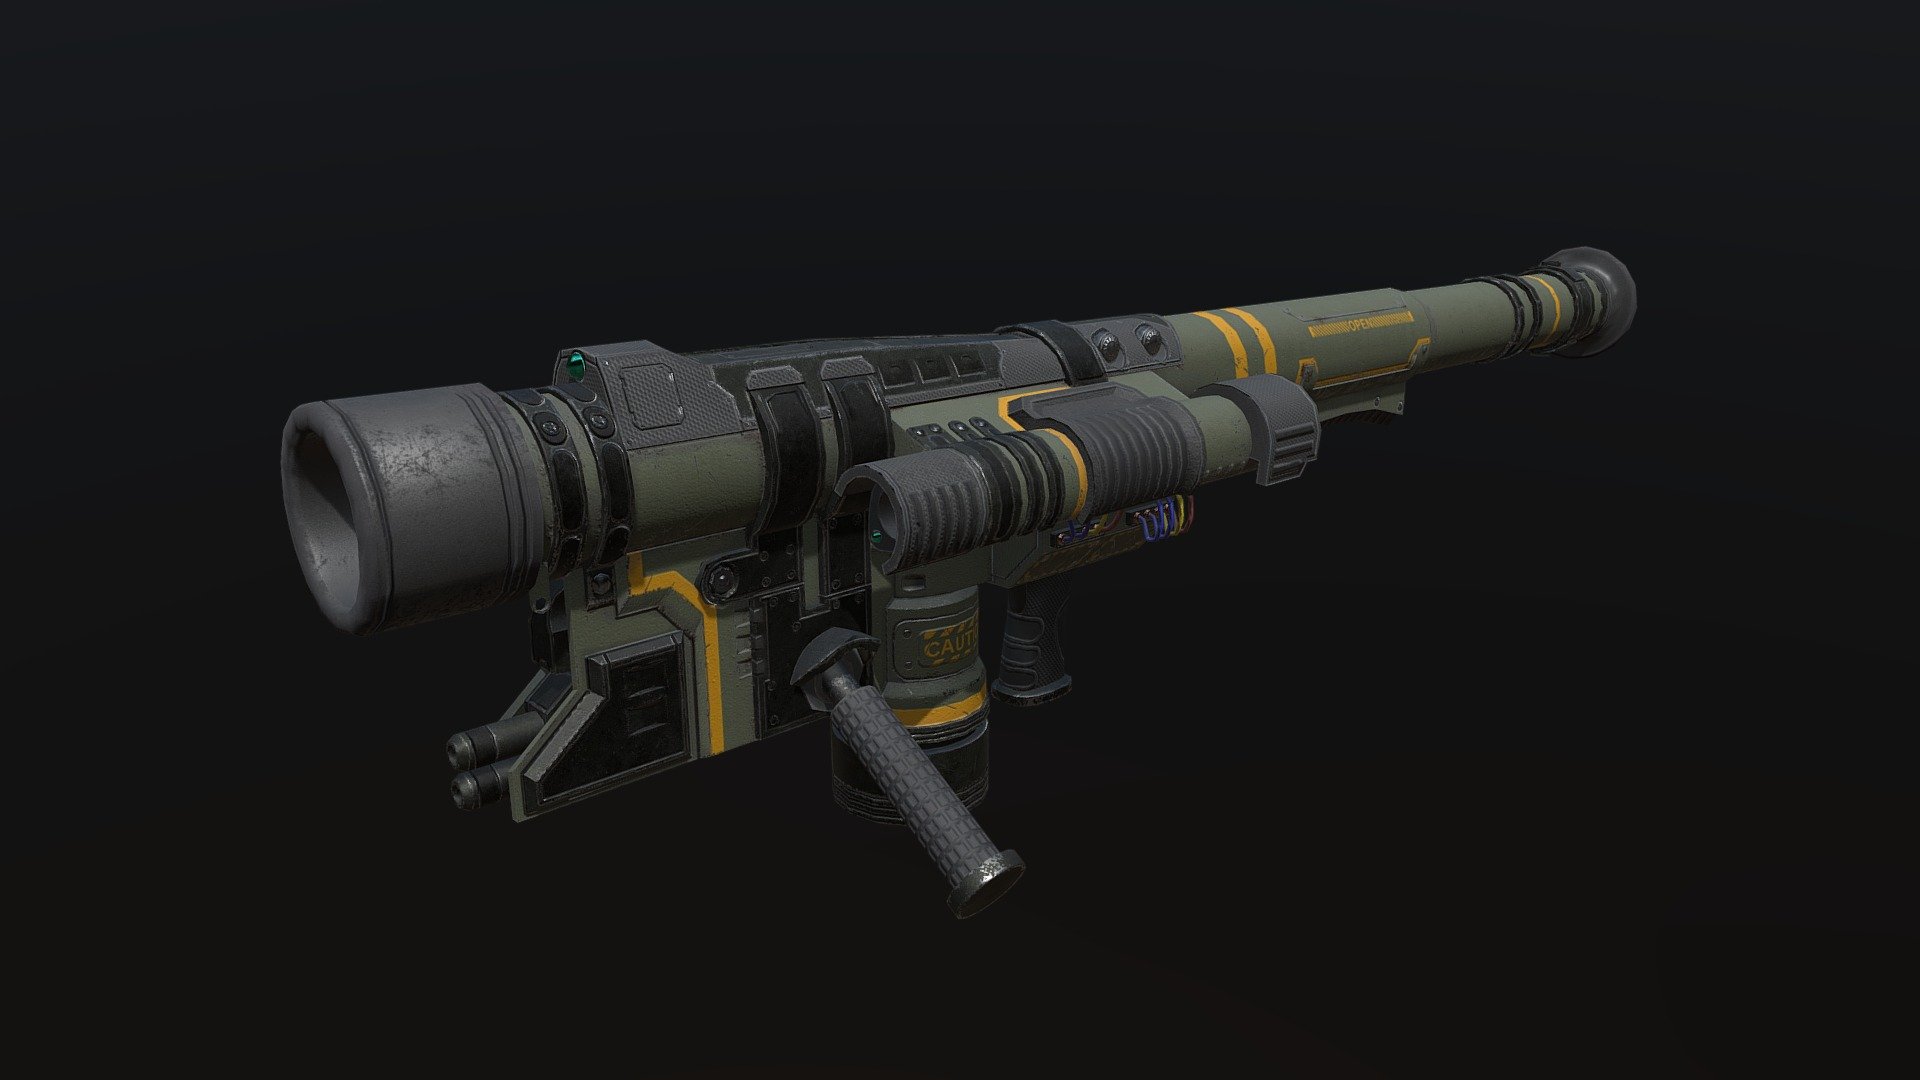 Another weapon I made for an unofficial mod called Raising the Bar Redux for Half-Life 2 game. This weapon is based on the original concept for a missile launcher from the beta of the game. The design is changed and altered in some places. These screenshots are made in Unreal Engine, though hopefully, this gun will make it to the Source Engine in the final release
Mod link: https://www.moddb.com/mods/half-life-2-raising-the-bar-redux
Artstation: https://www.artstation.com/artwork/mD53ld - Missile Launcher (Half Life 2: RTB:R Mod) - 3D model by Fearell 3d model